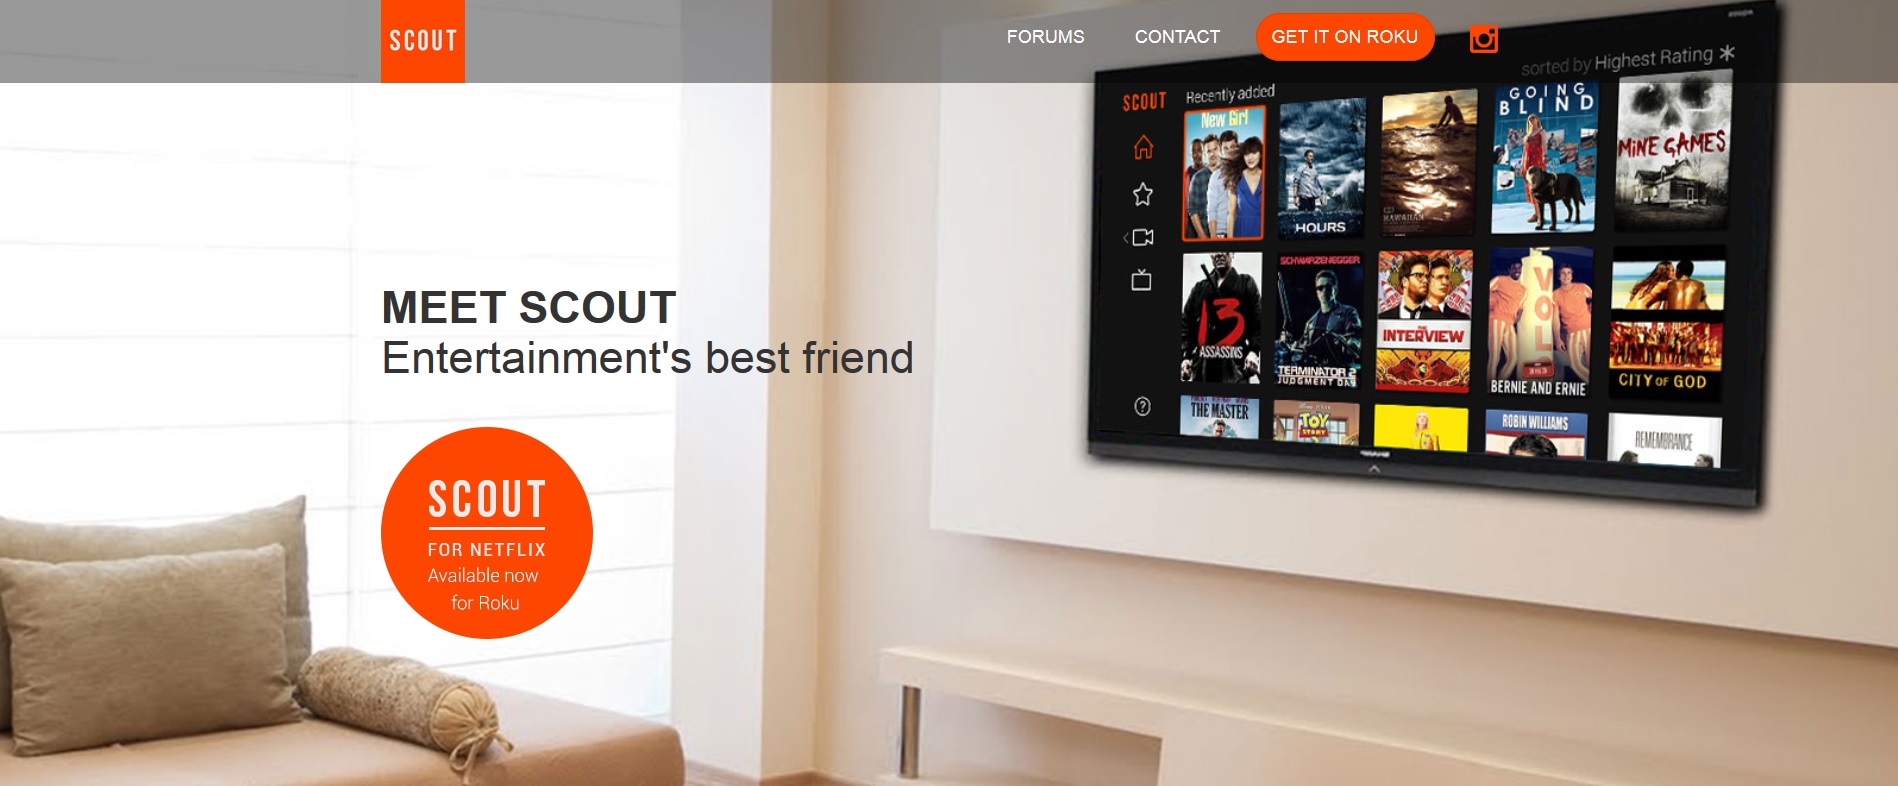 Scout for Netflix; is it Worth $1.99 a Year?